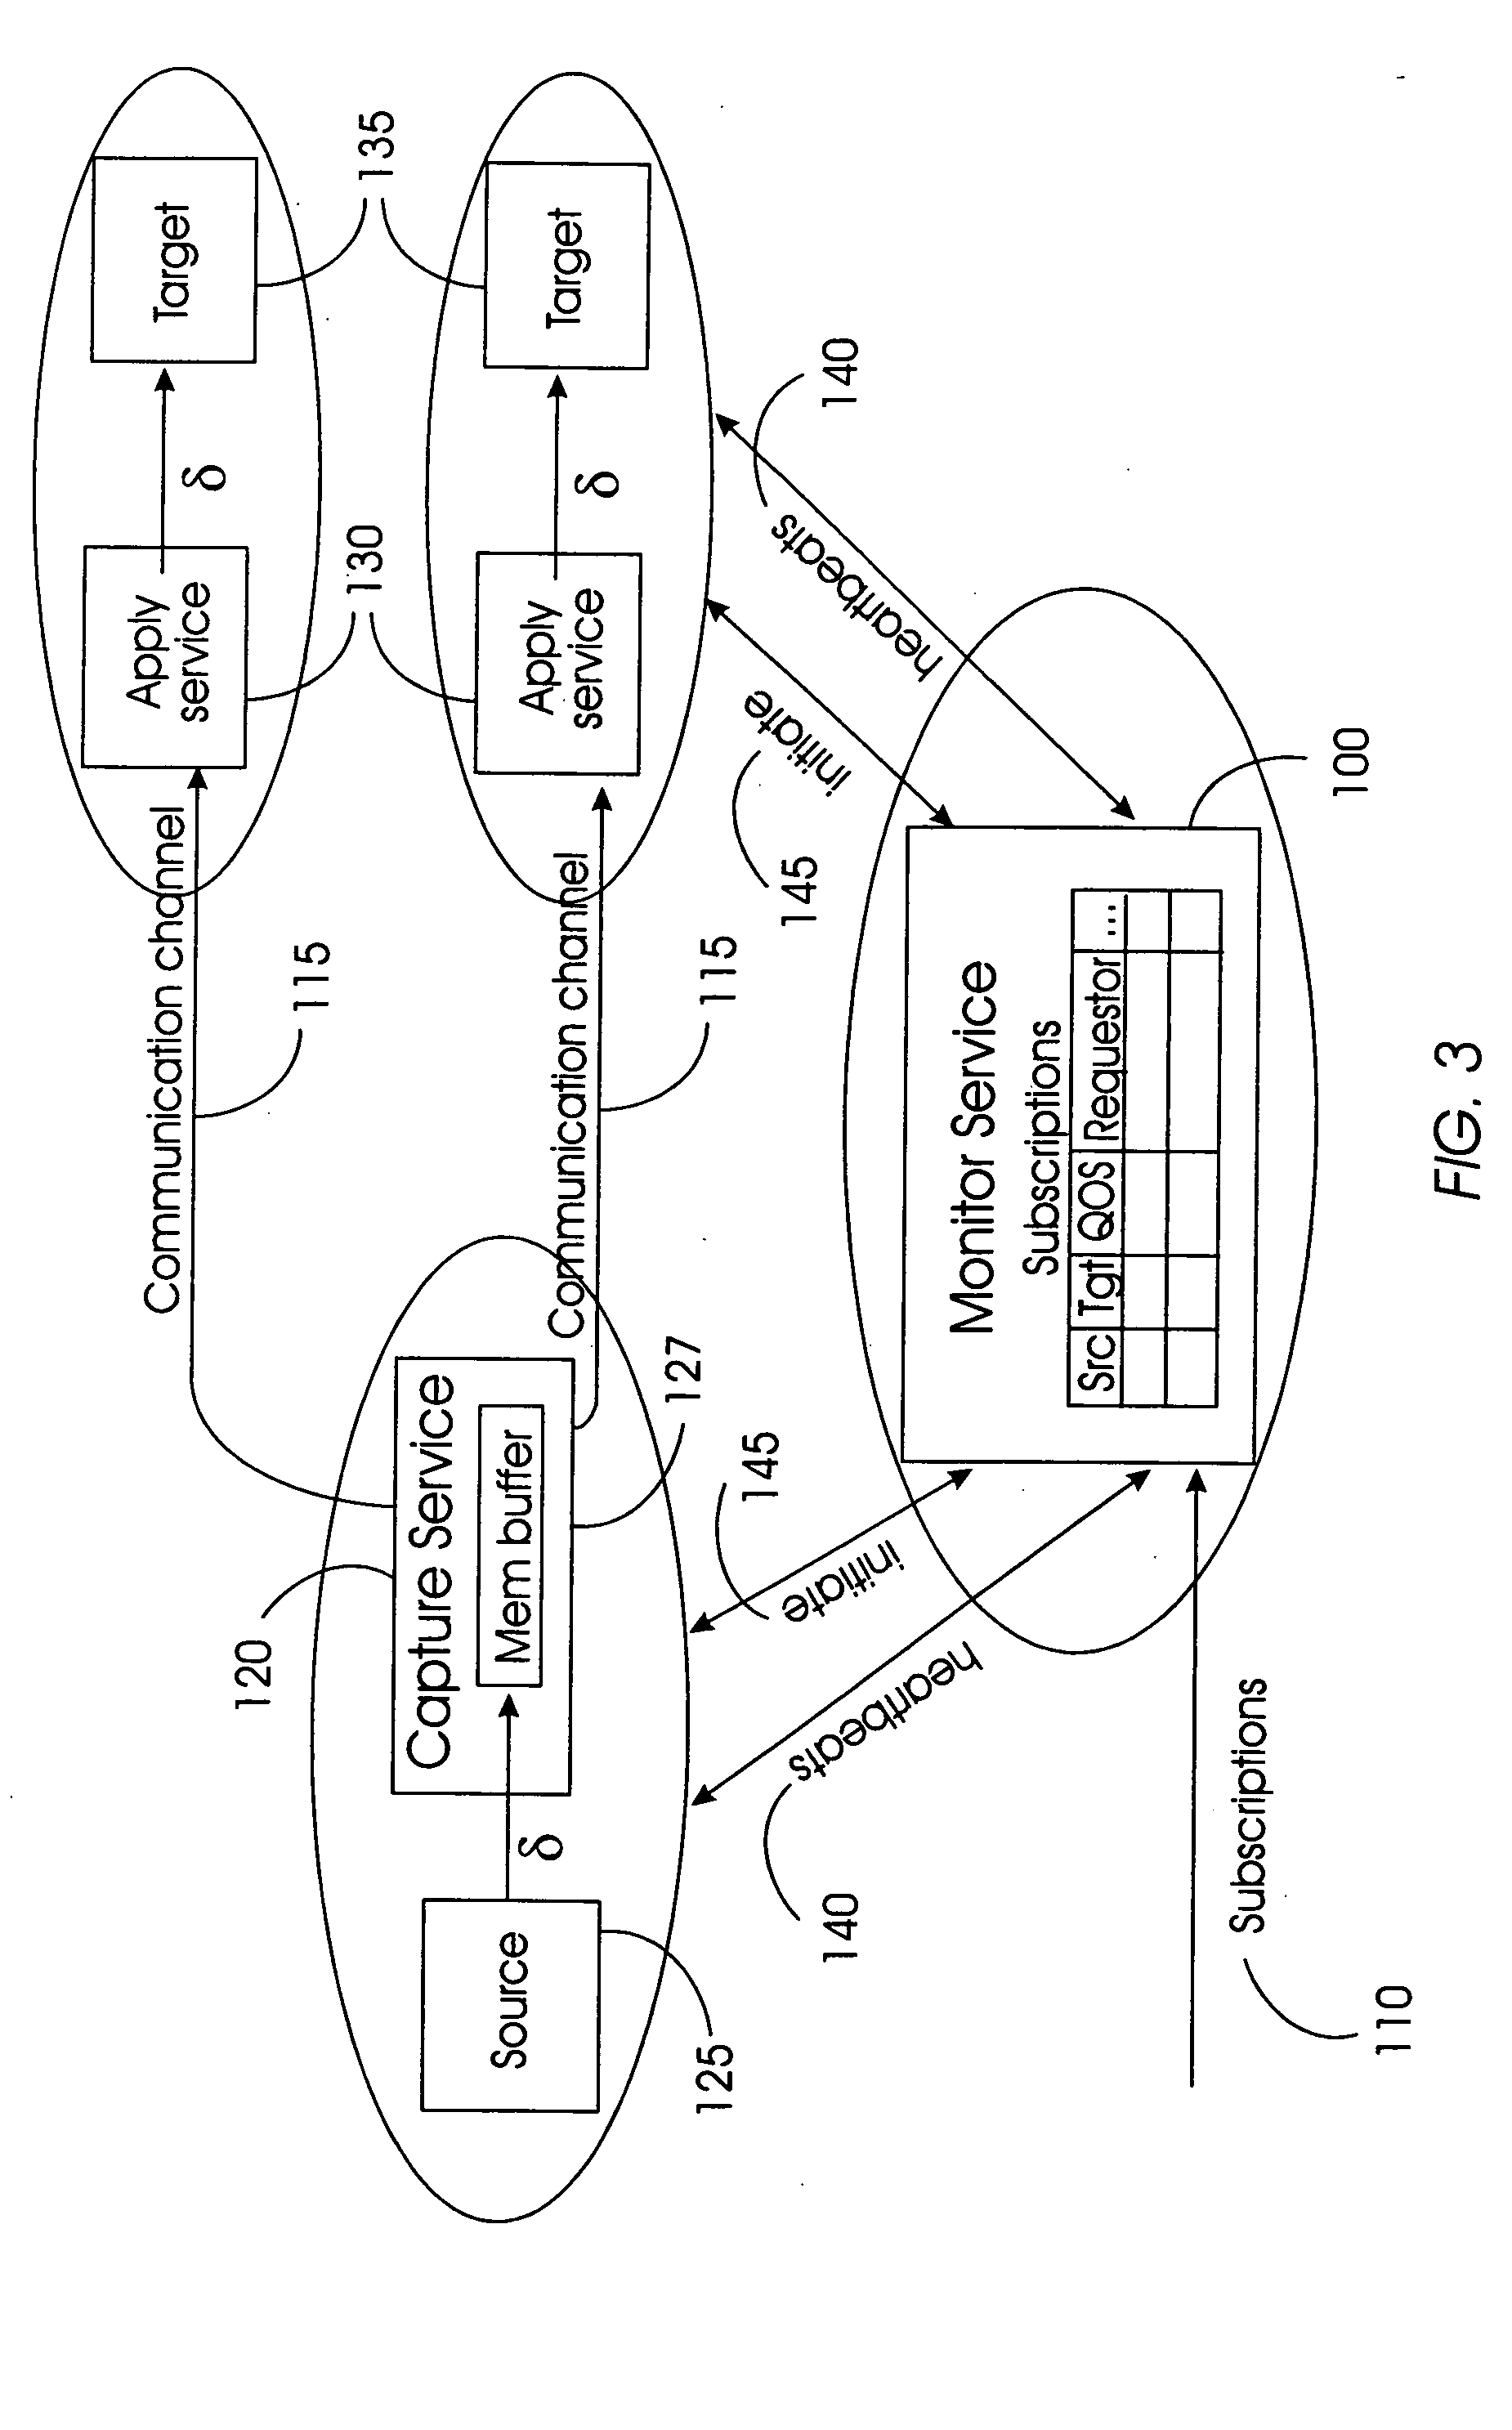 System and method for asynchronous data replication without persistence for distributed computing